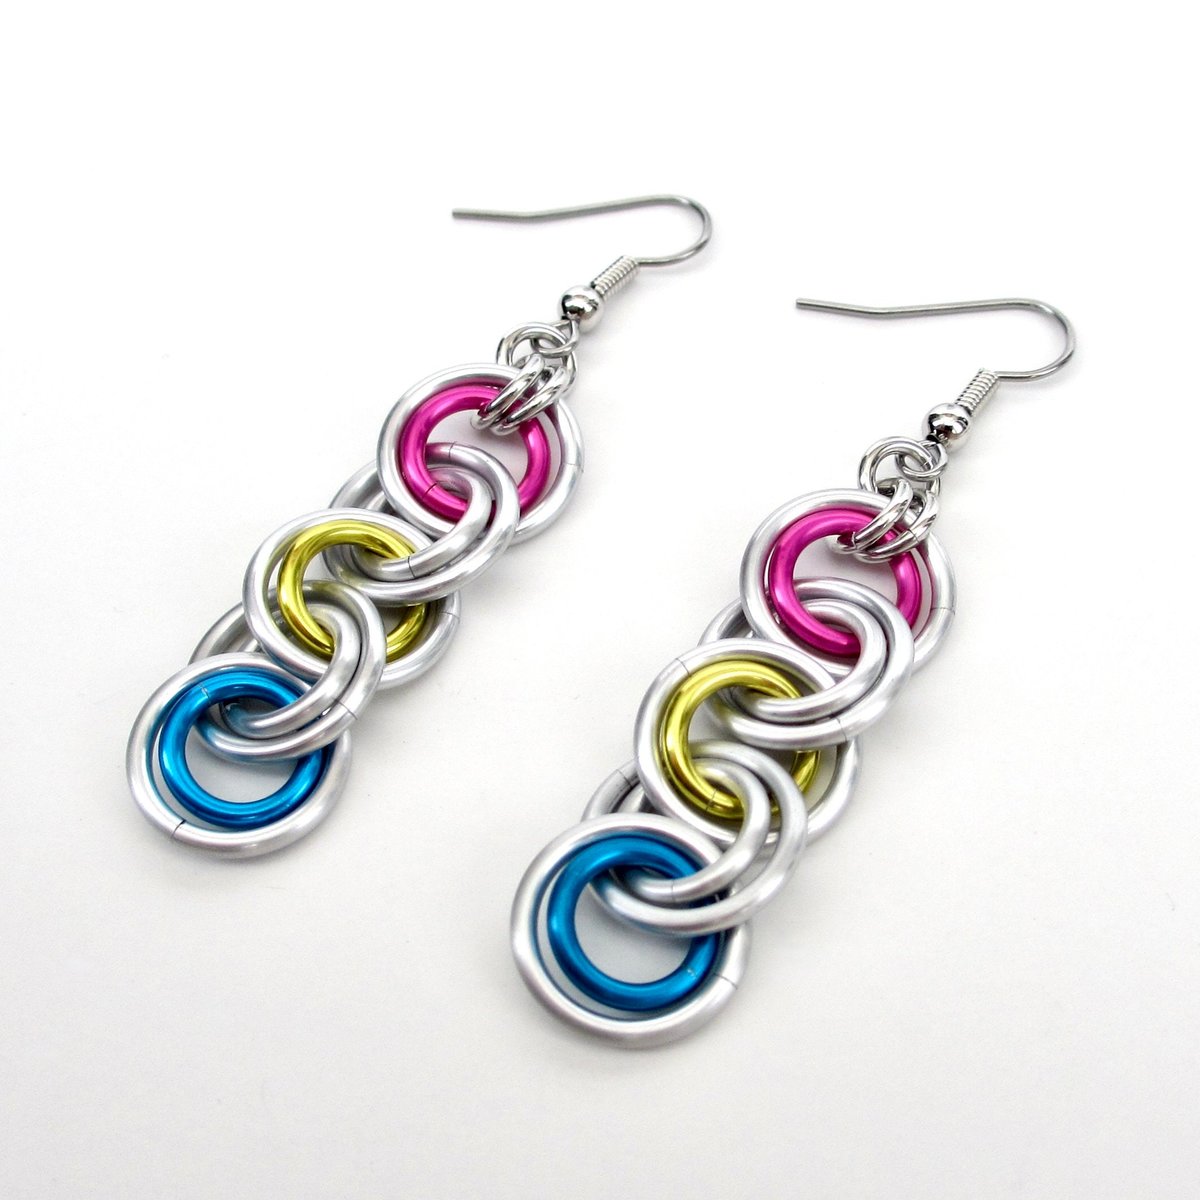 Pansexual pride jewelry, long chainmail LGBTQ earrings, pink yellow blue